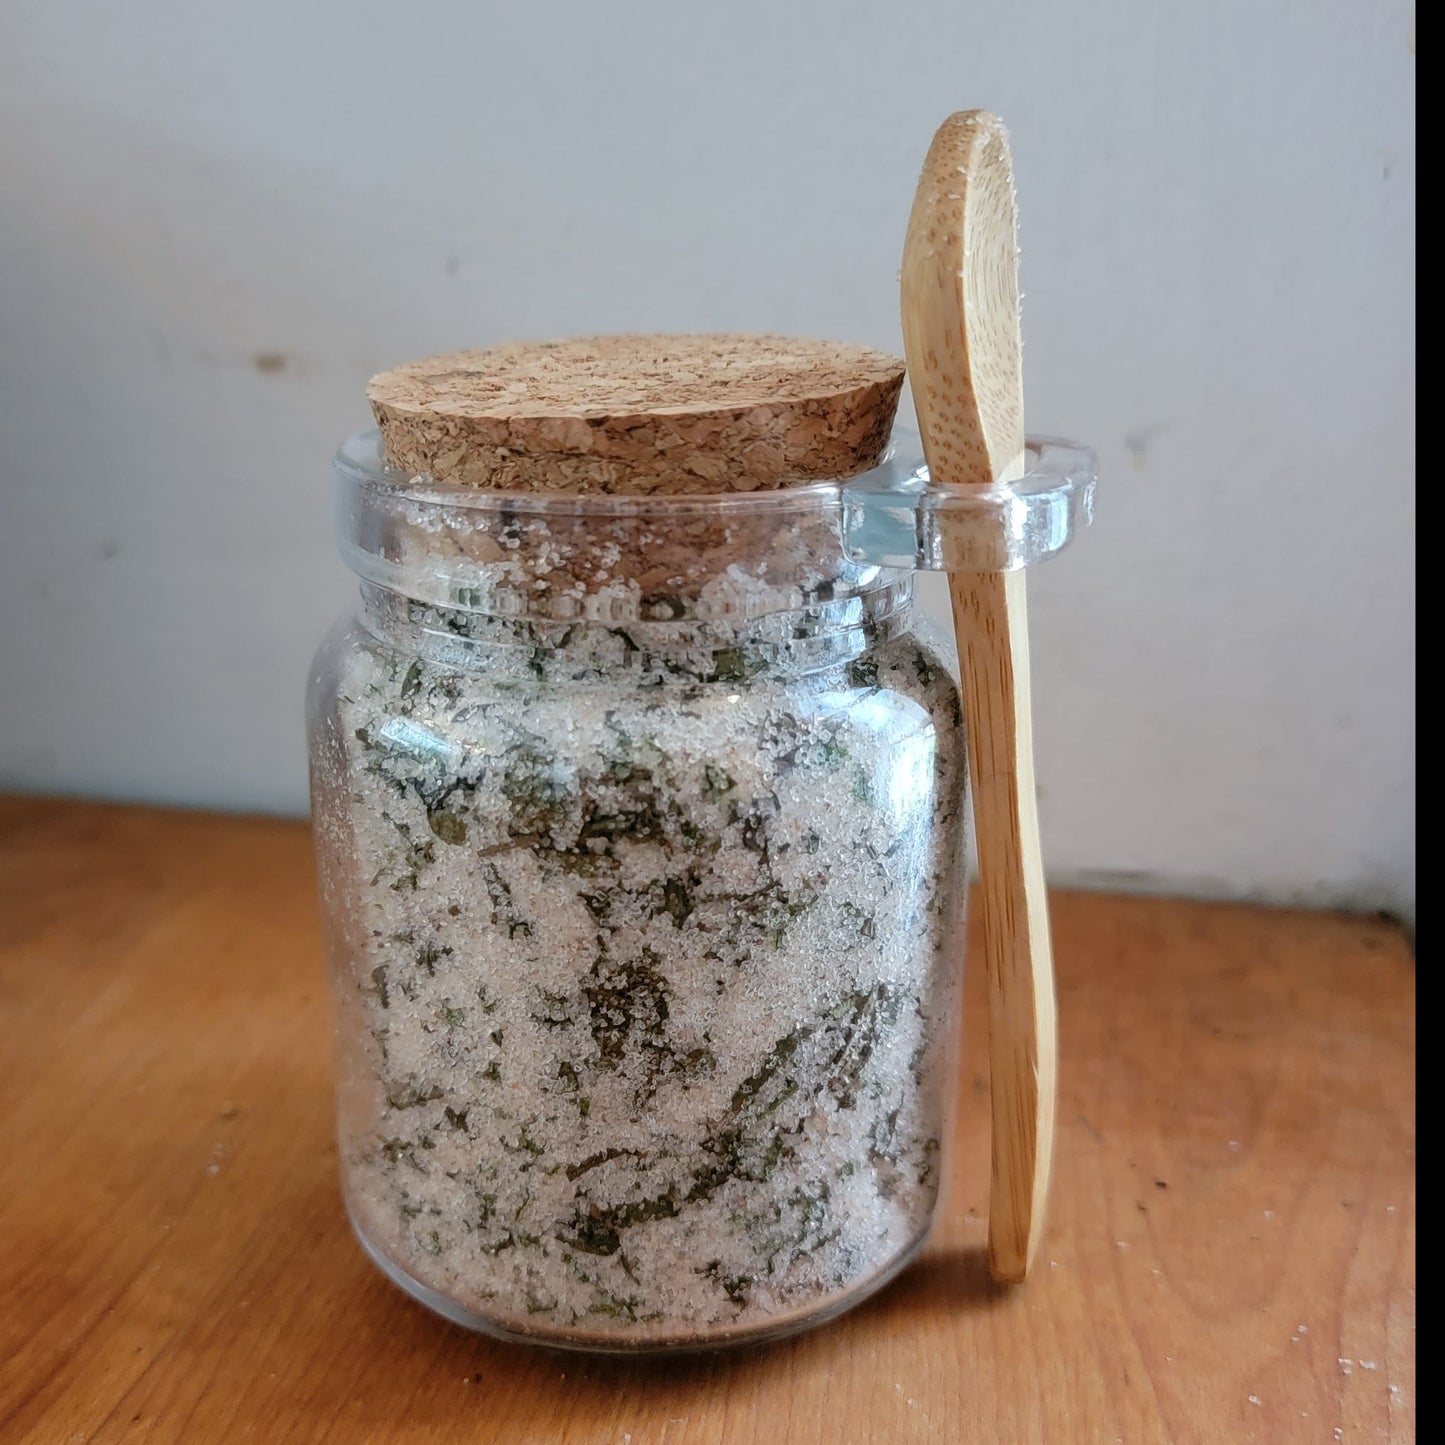 Salted Cooking Herbs